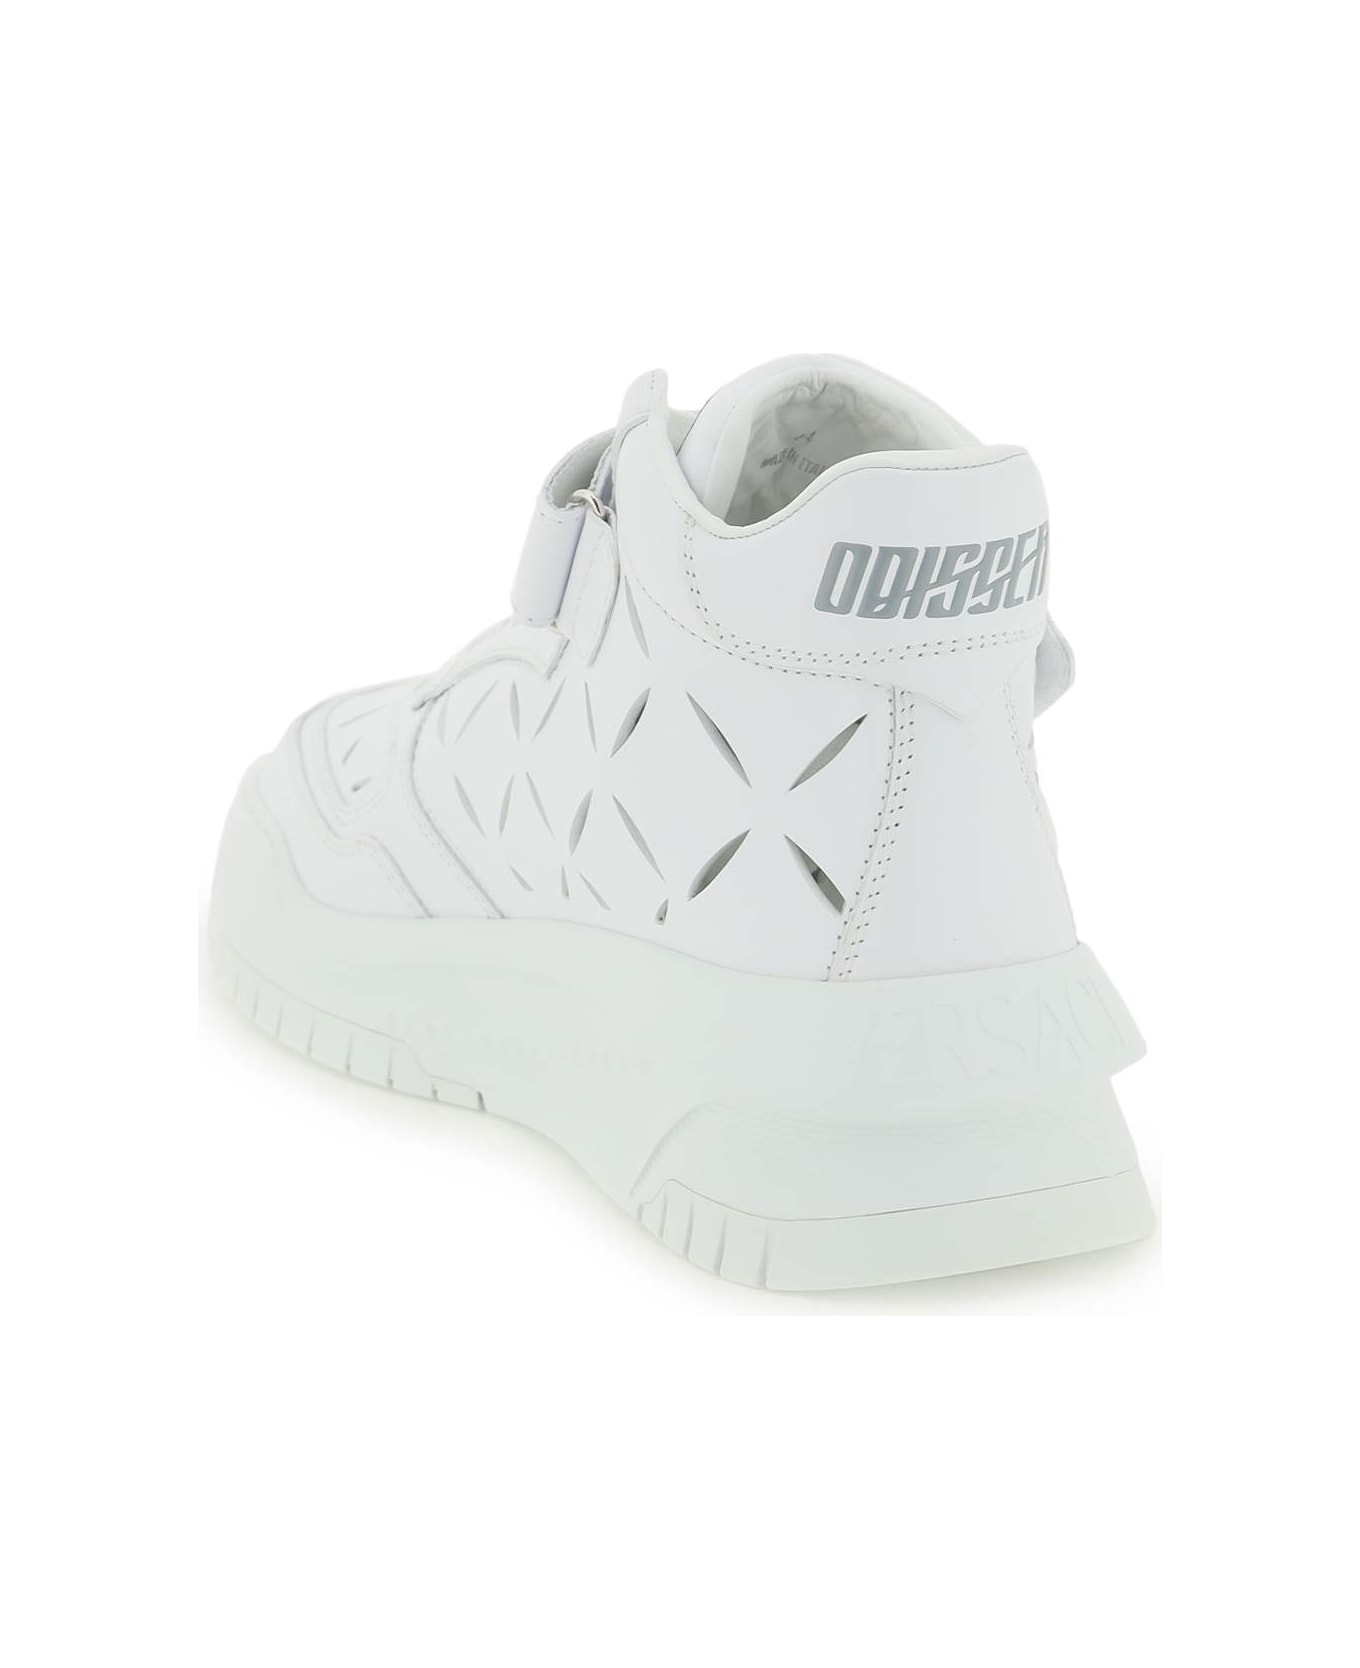 Versace Odissea Leather High-top Sneakers - White